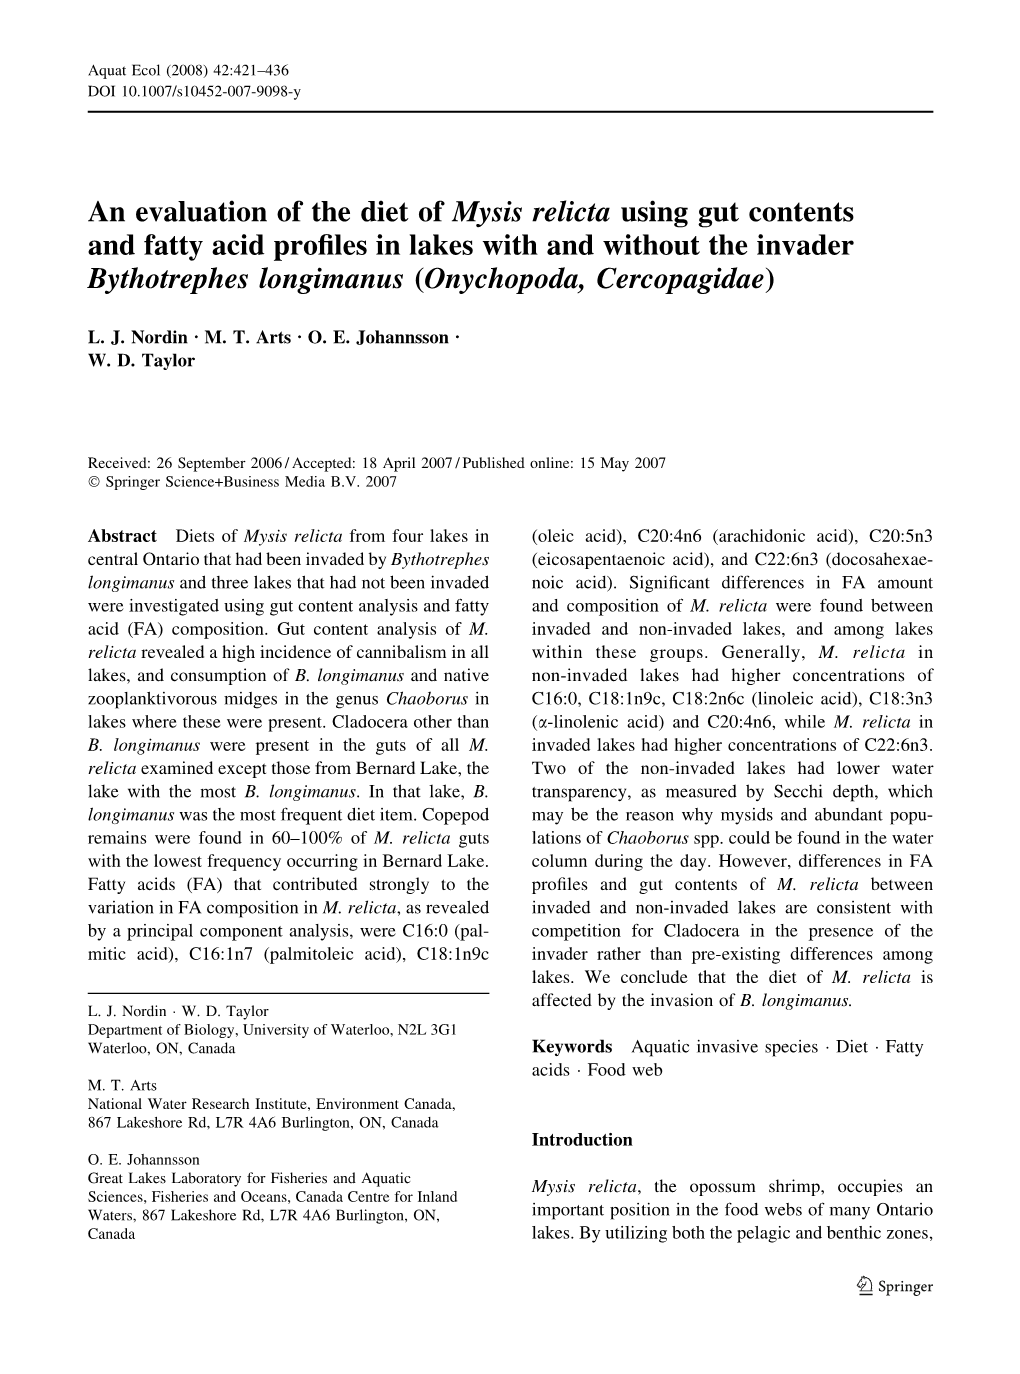 An Evaluation of the Diet of Mysis Relicta Using Gut Contents and Fatty